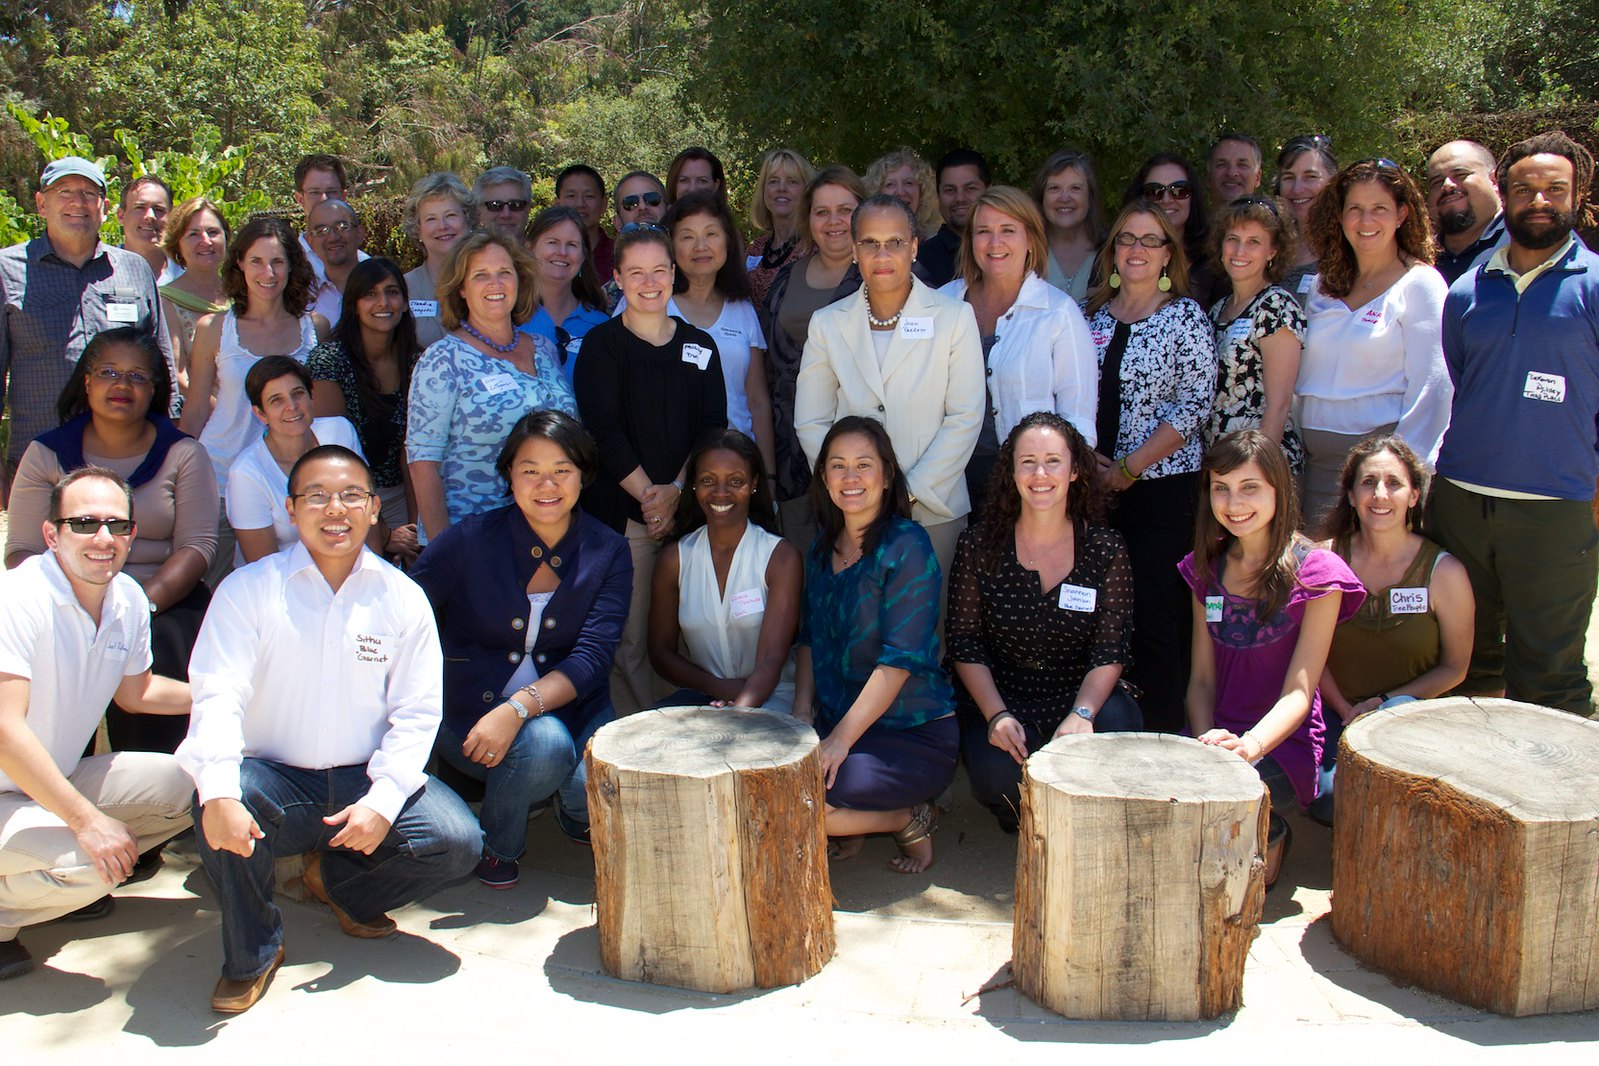 A large group photo of guests at Blue Garnet's 10th Anniversary strategy lab